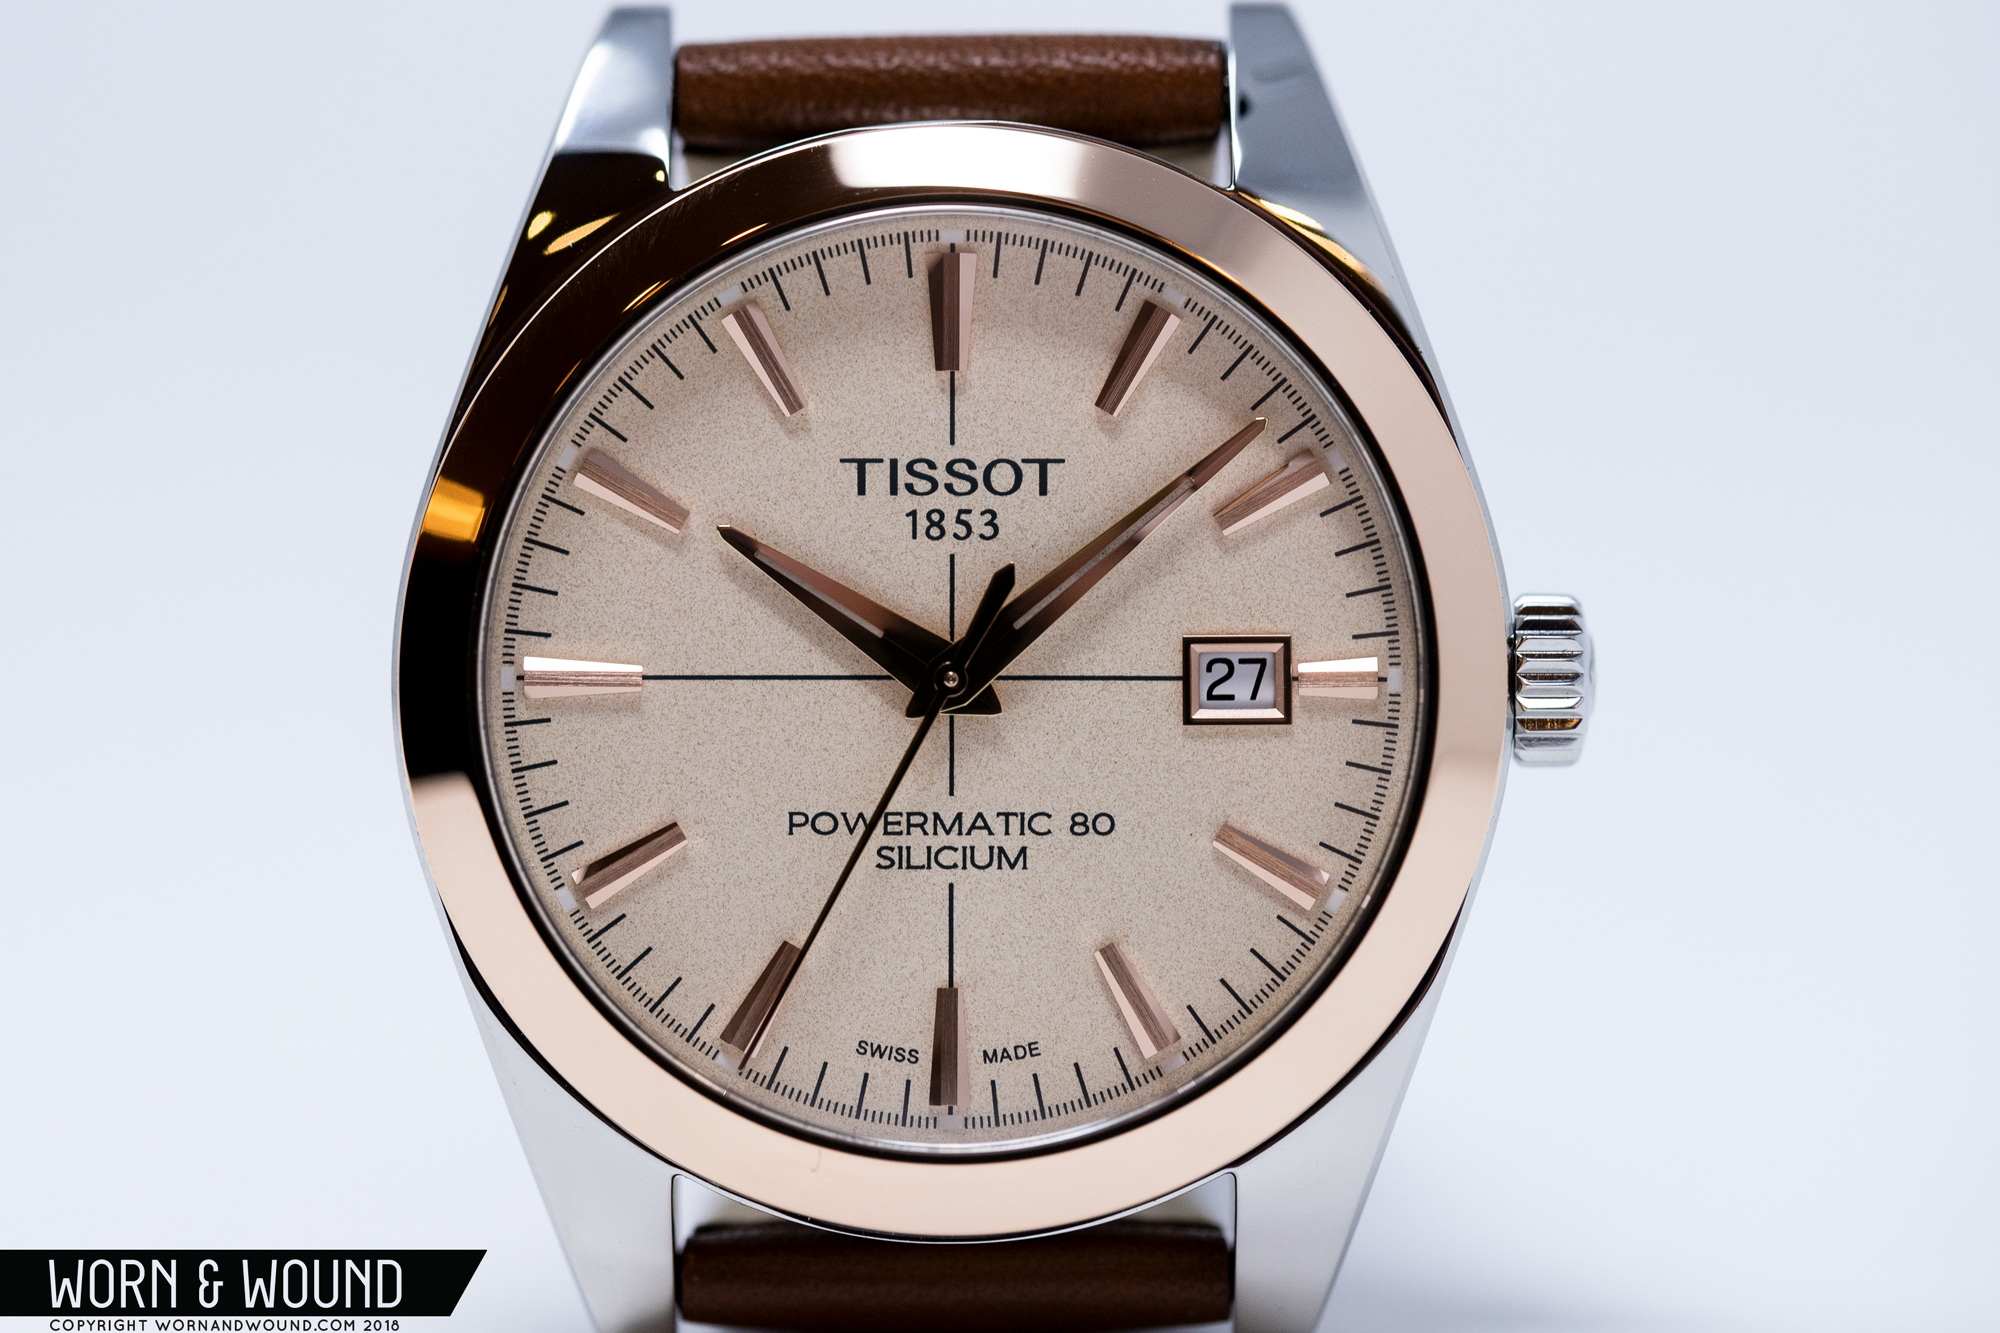 Worn & Wound - First Look: The Two-Tone Tissot Gentleman Offers an 